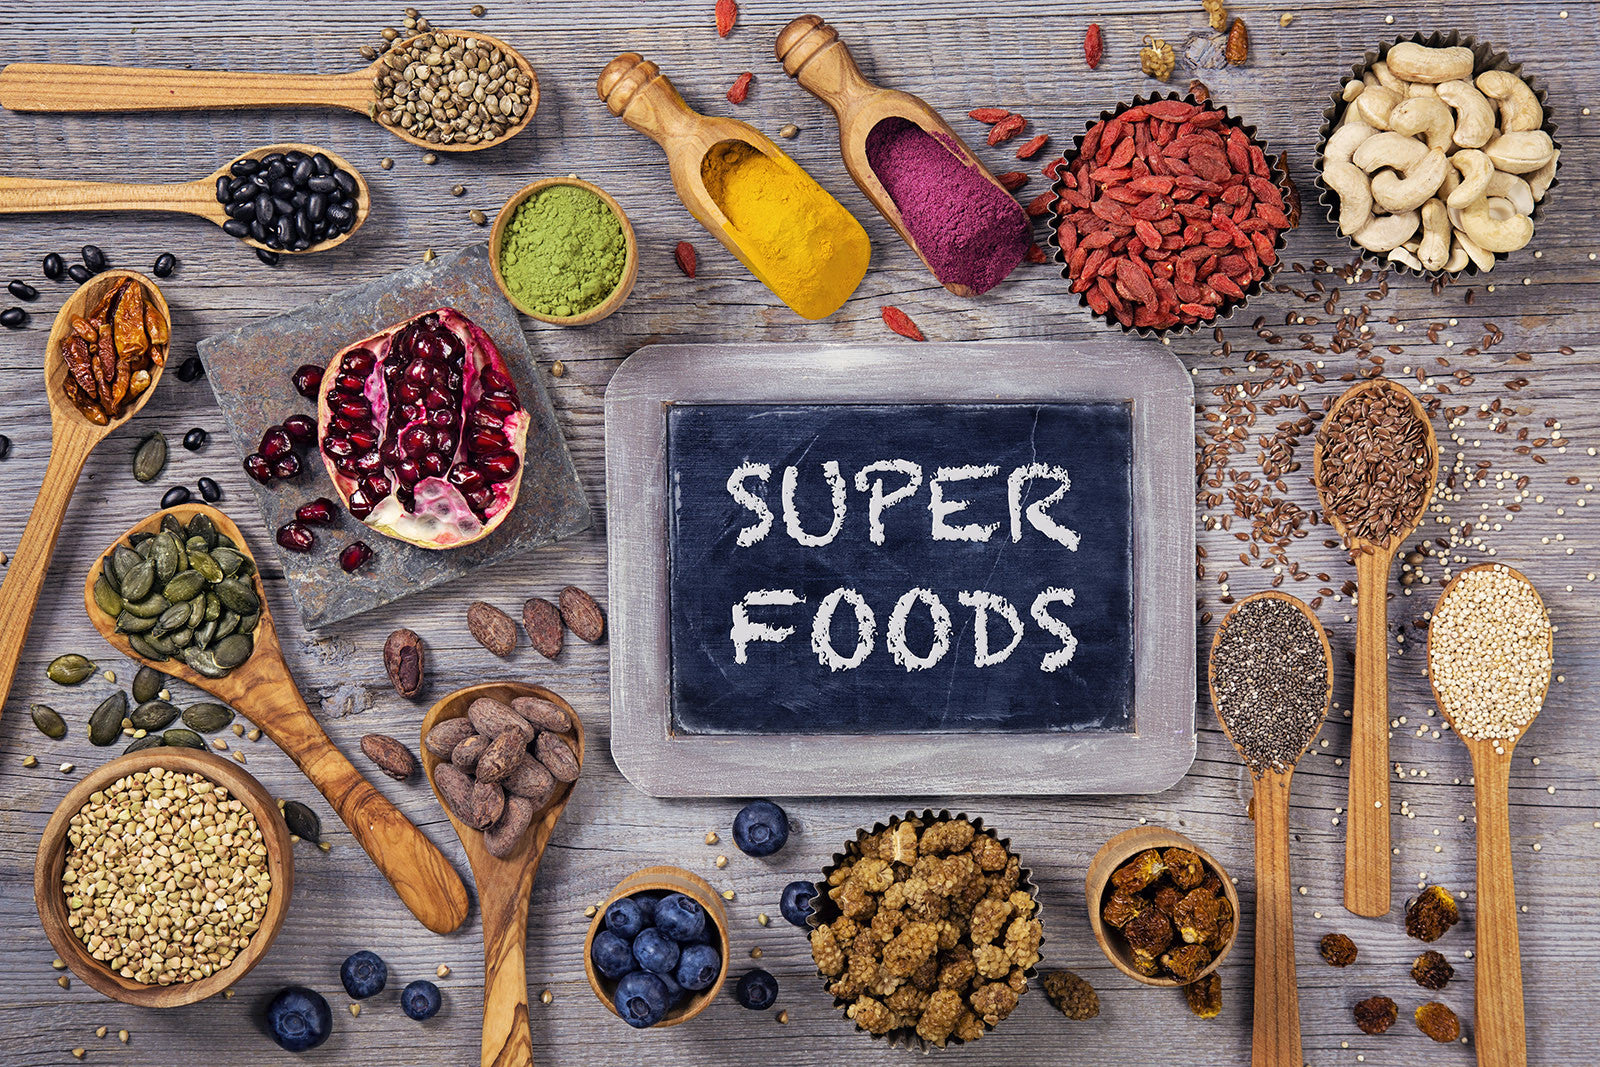 Superfoods to the Rescue? Separating Fact from Agenda